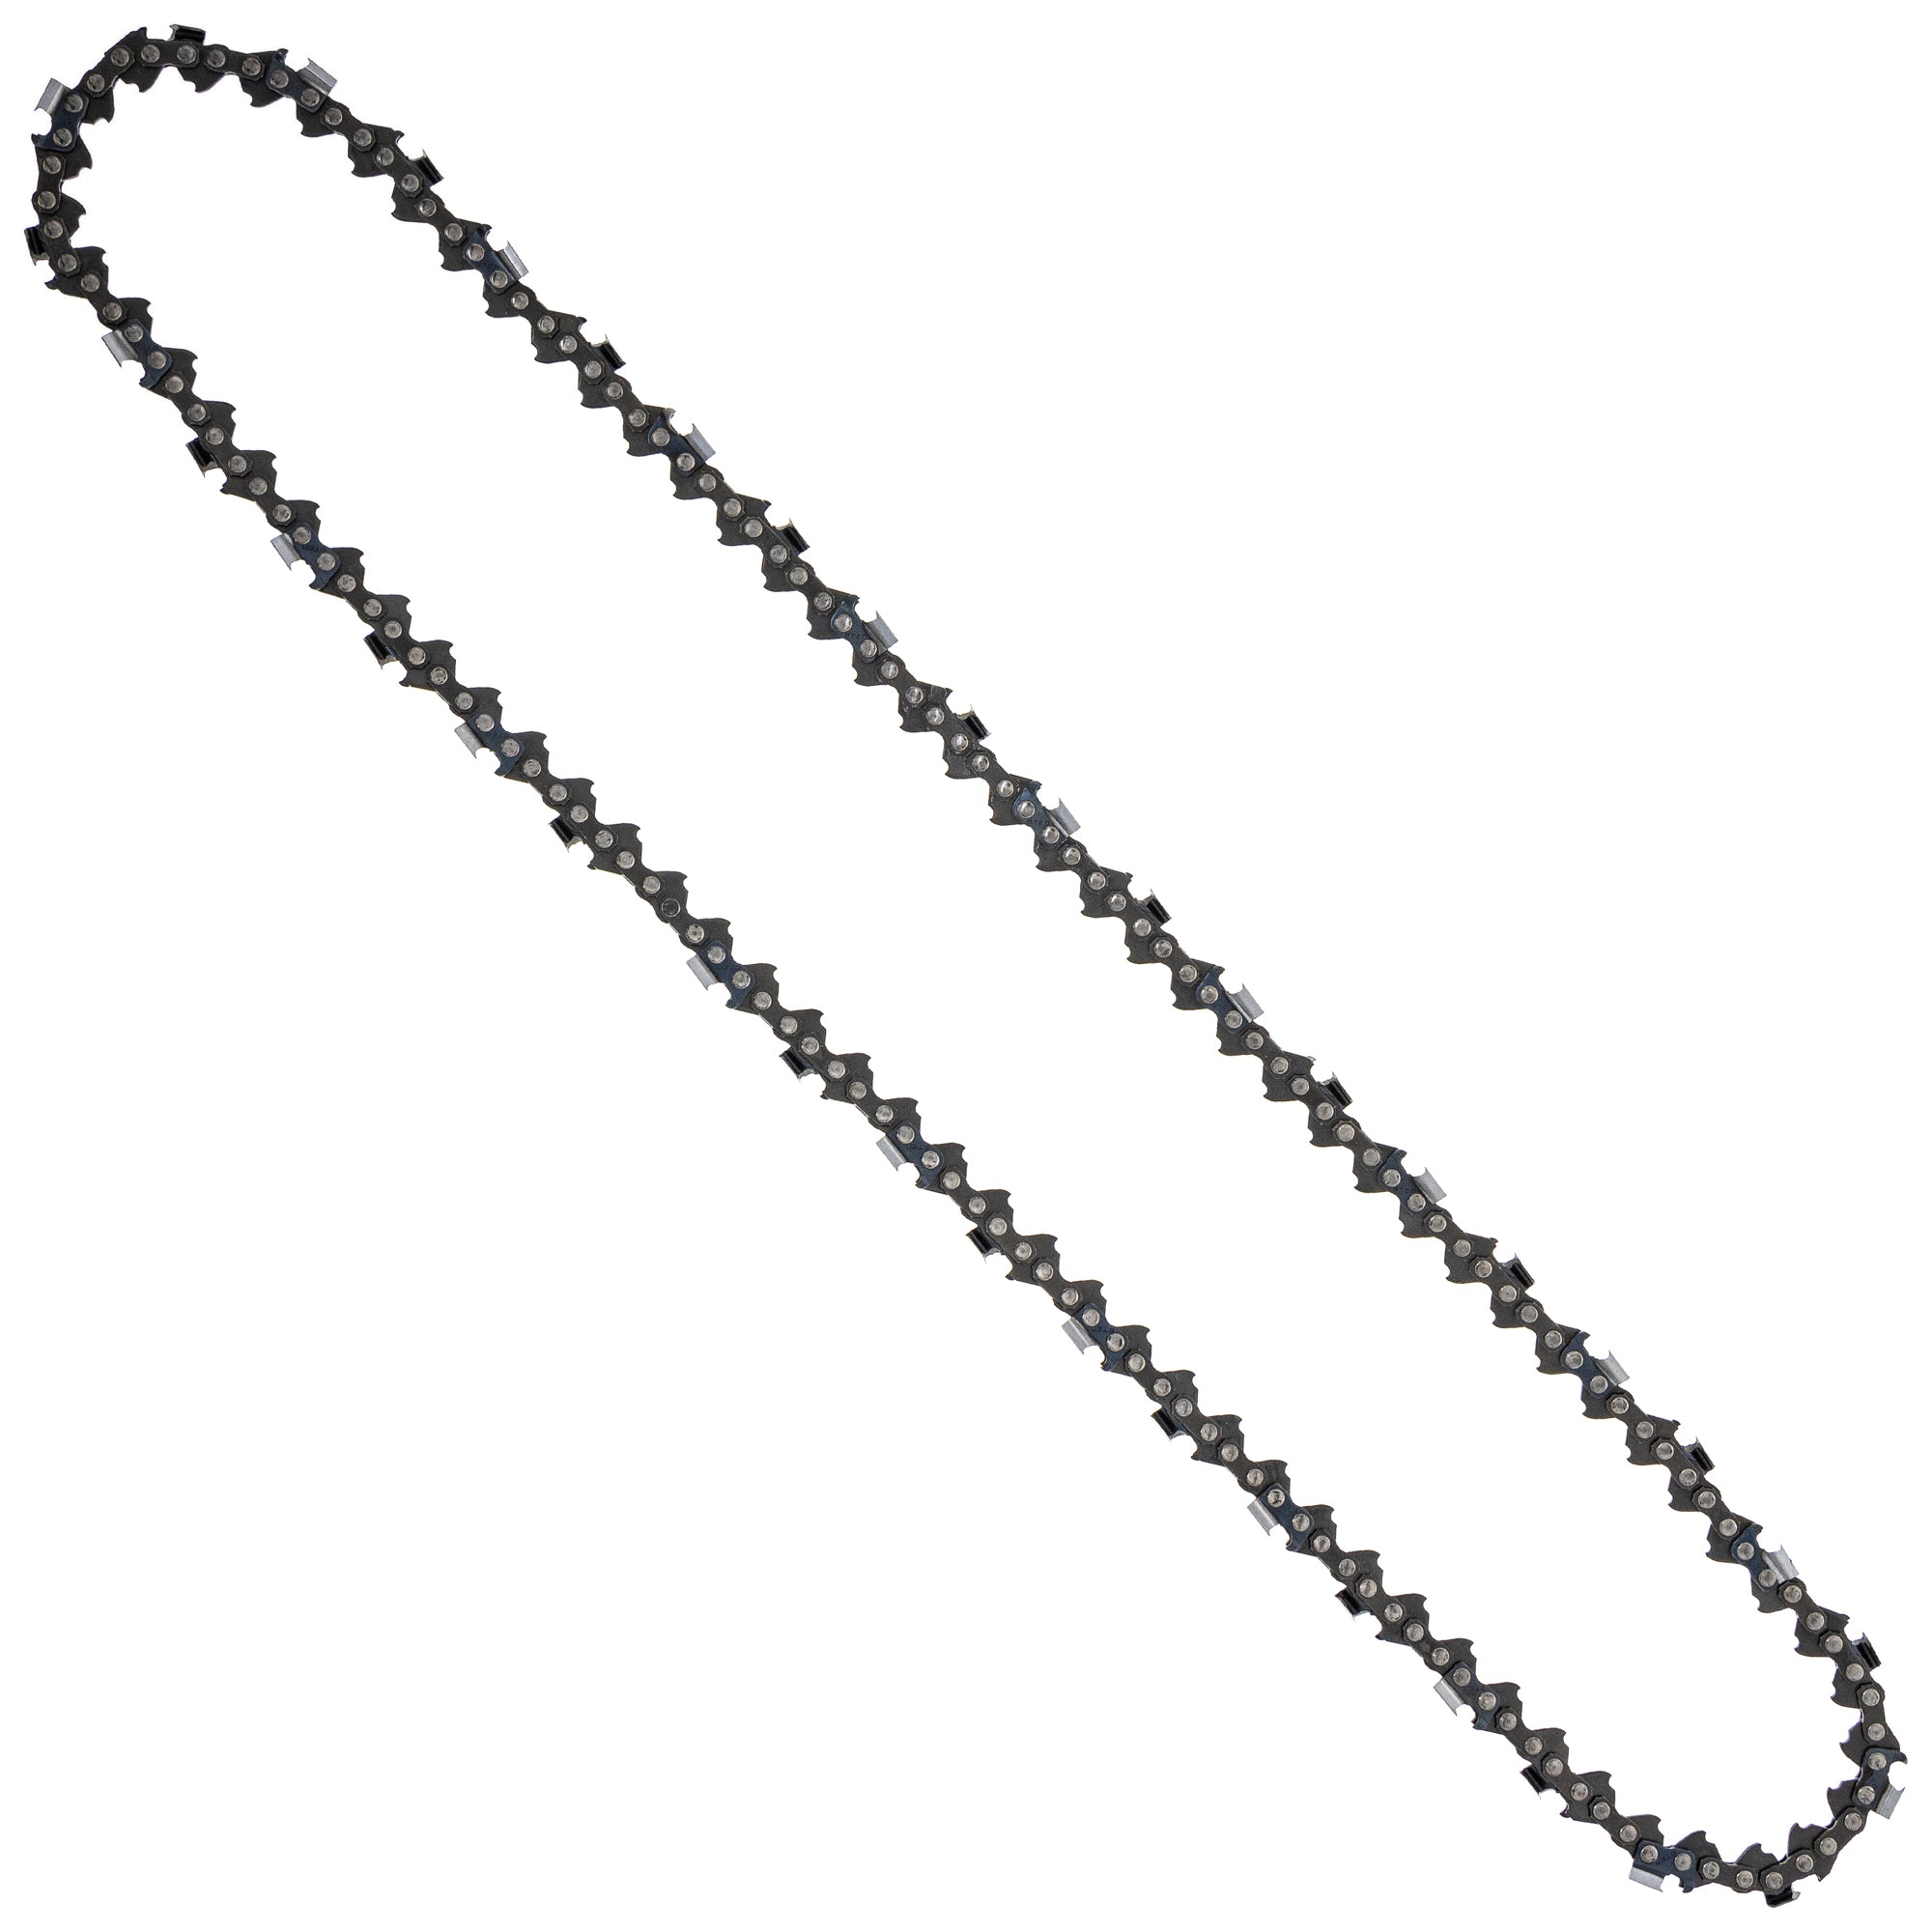 8TEN 810-CCC2279H Chain 6-Pack for zOTHER Stens Oregon MS 634 40 36